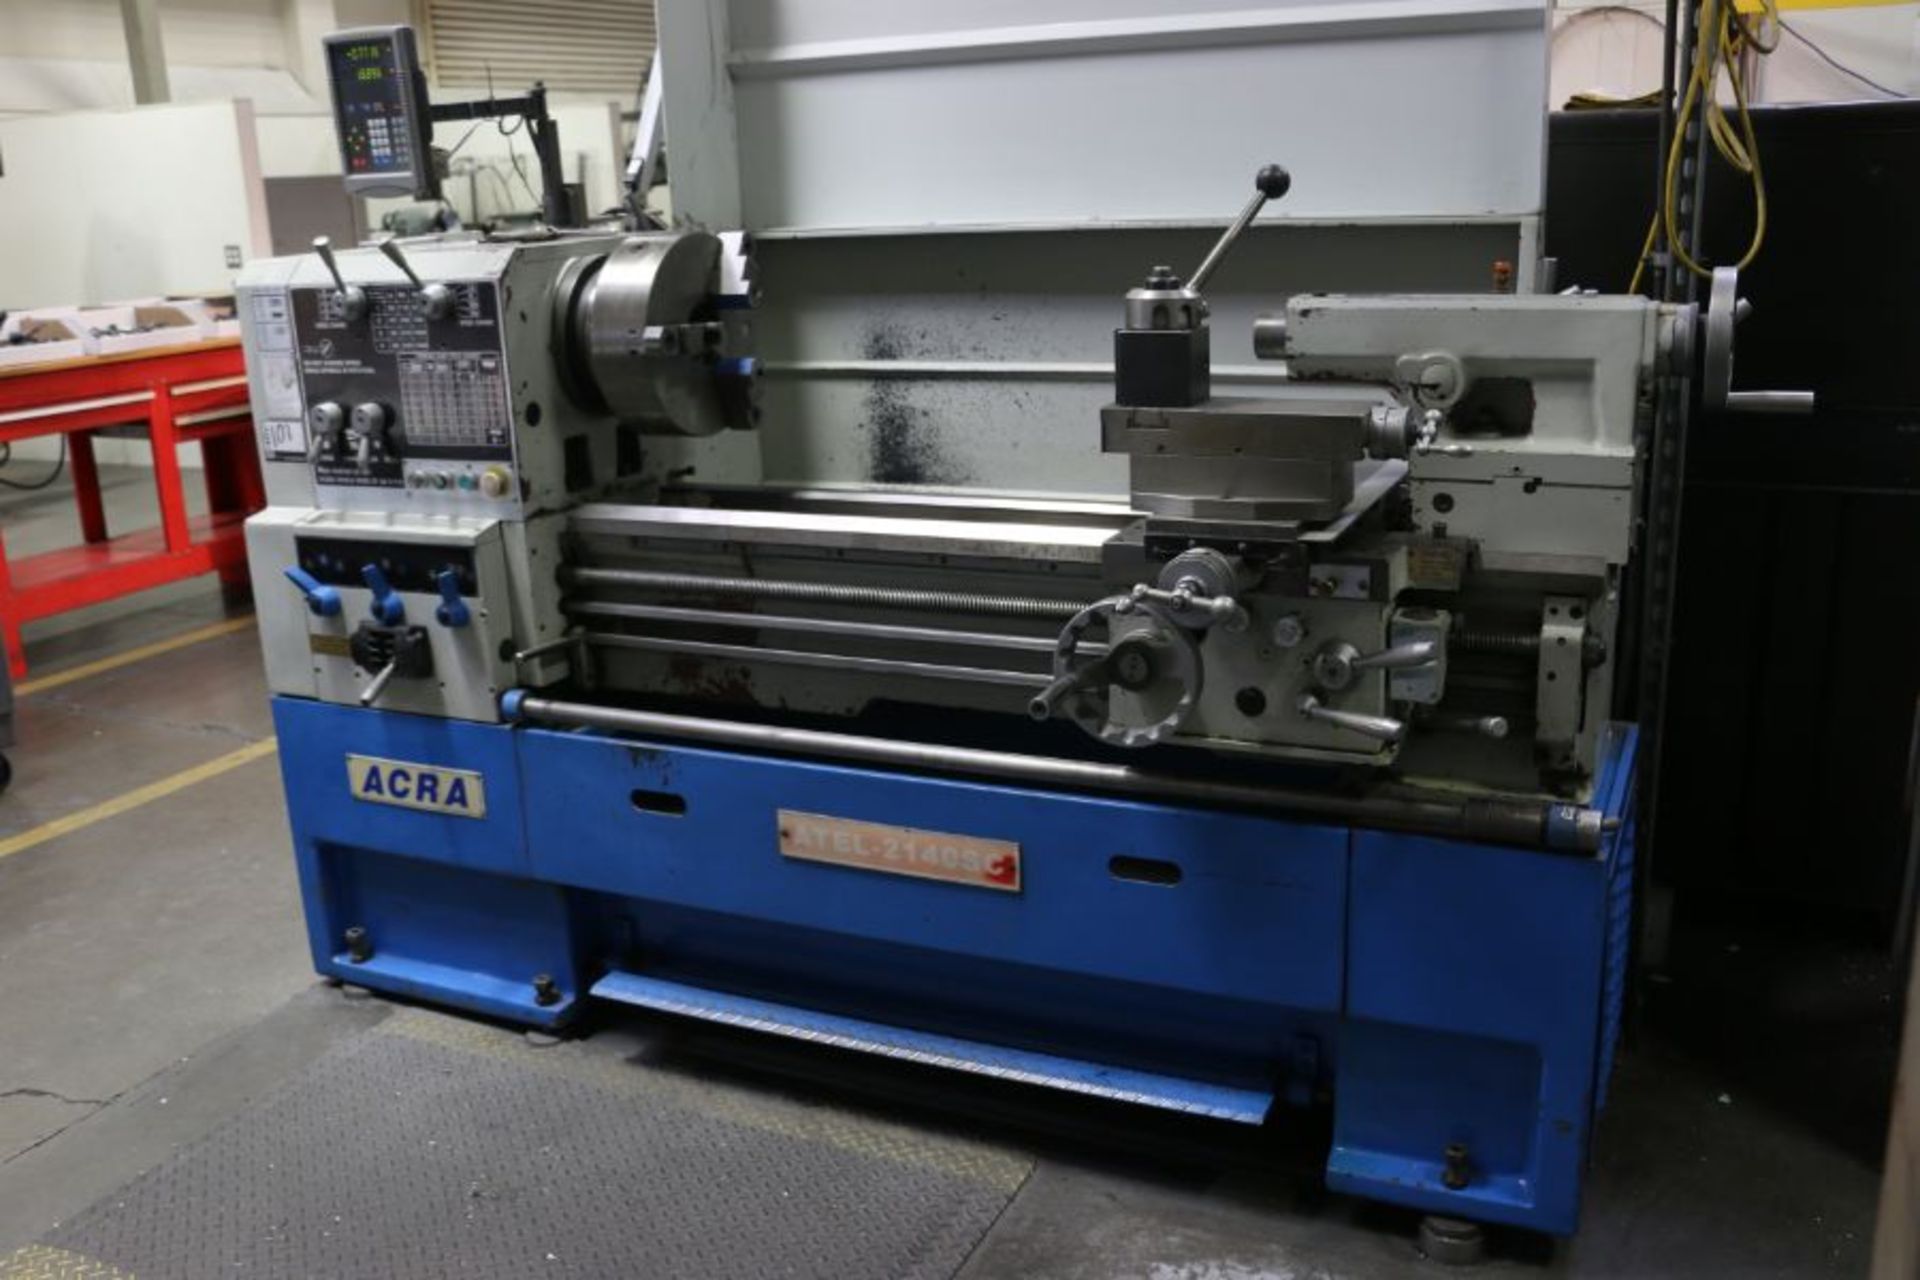 Acra Atel-2140SC 21" x 40" Gear Lathe, 13" 3 Jaw Chuck, 3" Bore, Newall C80 DRO, s/n 2140503023, New - Image 3 of 9